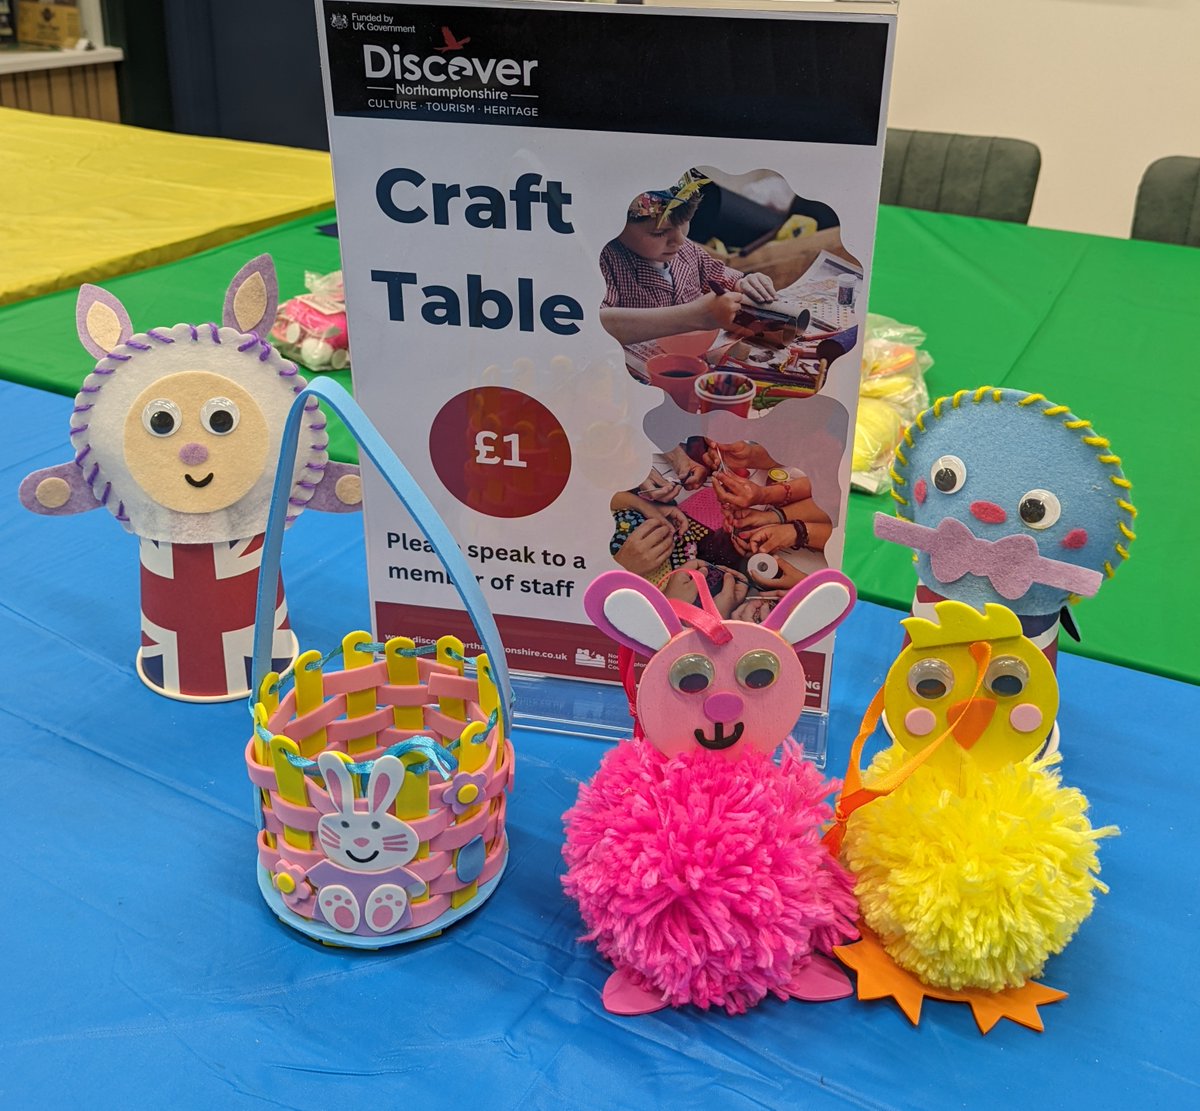 Come and join us for Easter crafts this week for only £1 per child!
We are open 7 days a week from 10am-5pm (Sun: 11am-4:30pm) and located next to Starbucks at Rushden Lakes.
#discovernorthamptonshire #wherenext #ukspf #northamptonshire @NNorthantsC @WestNorthants @RushdenLakesSC